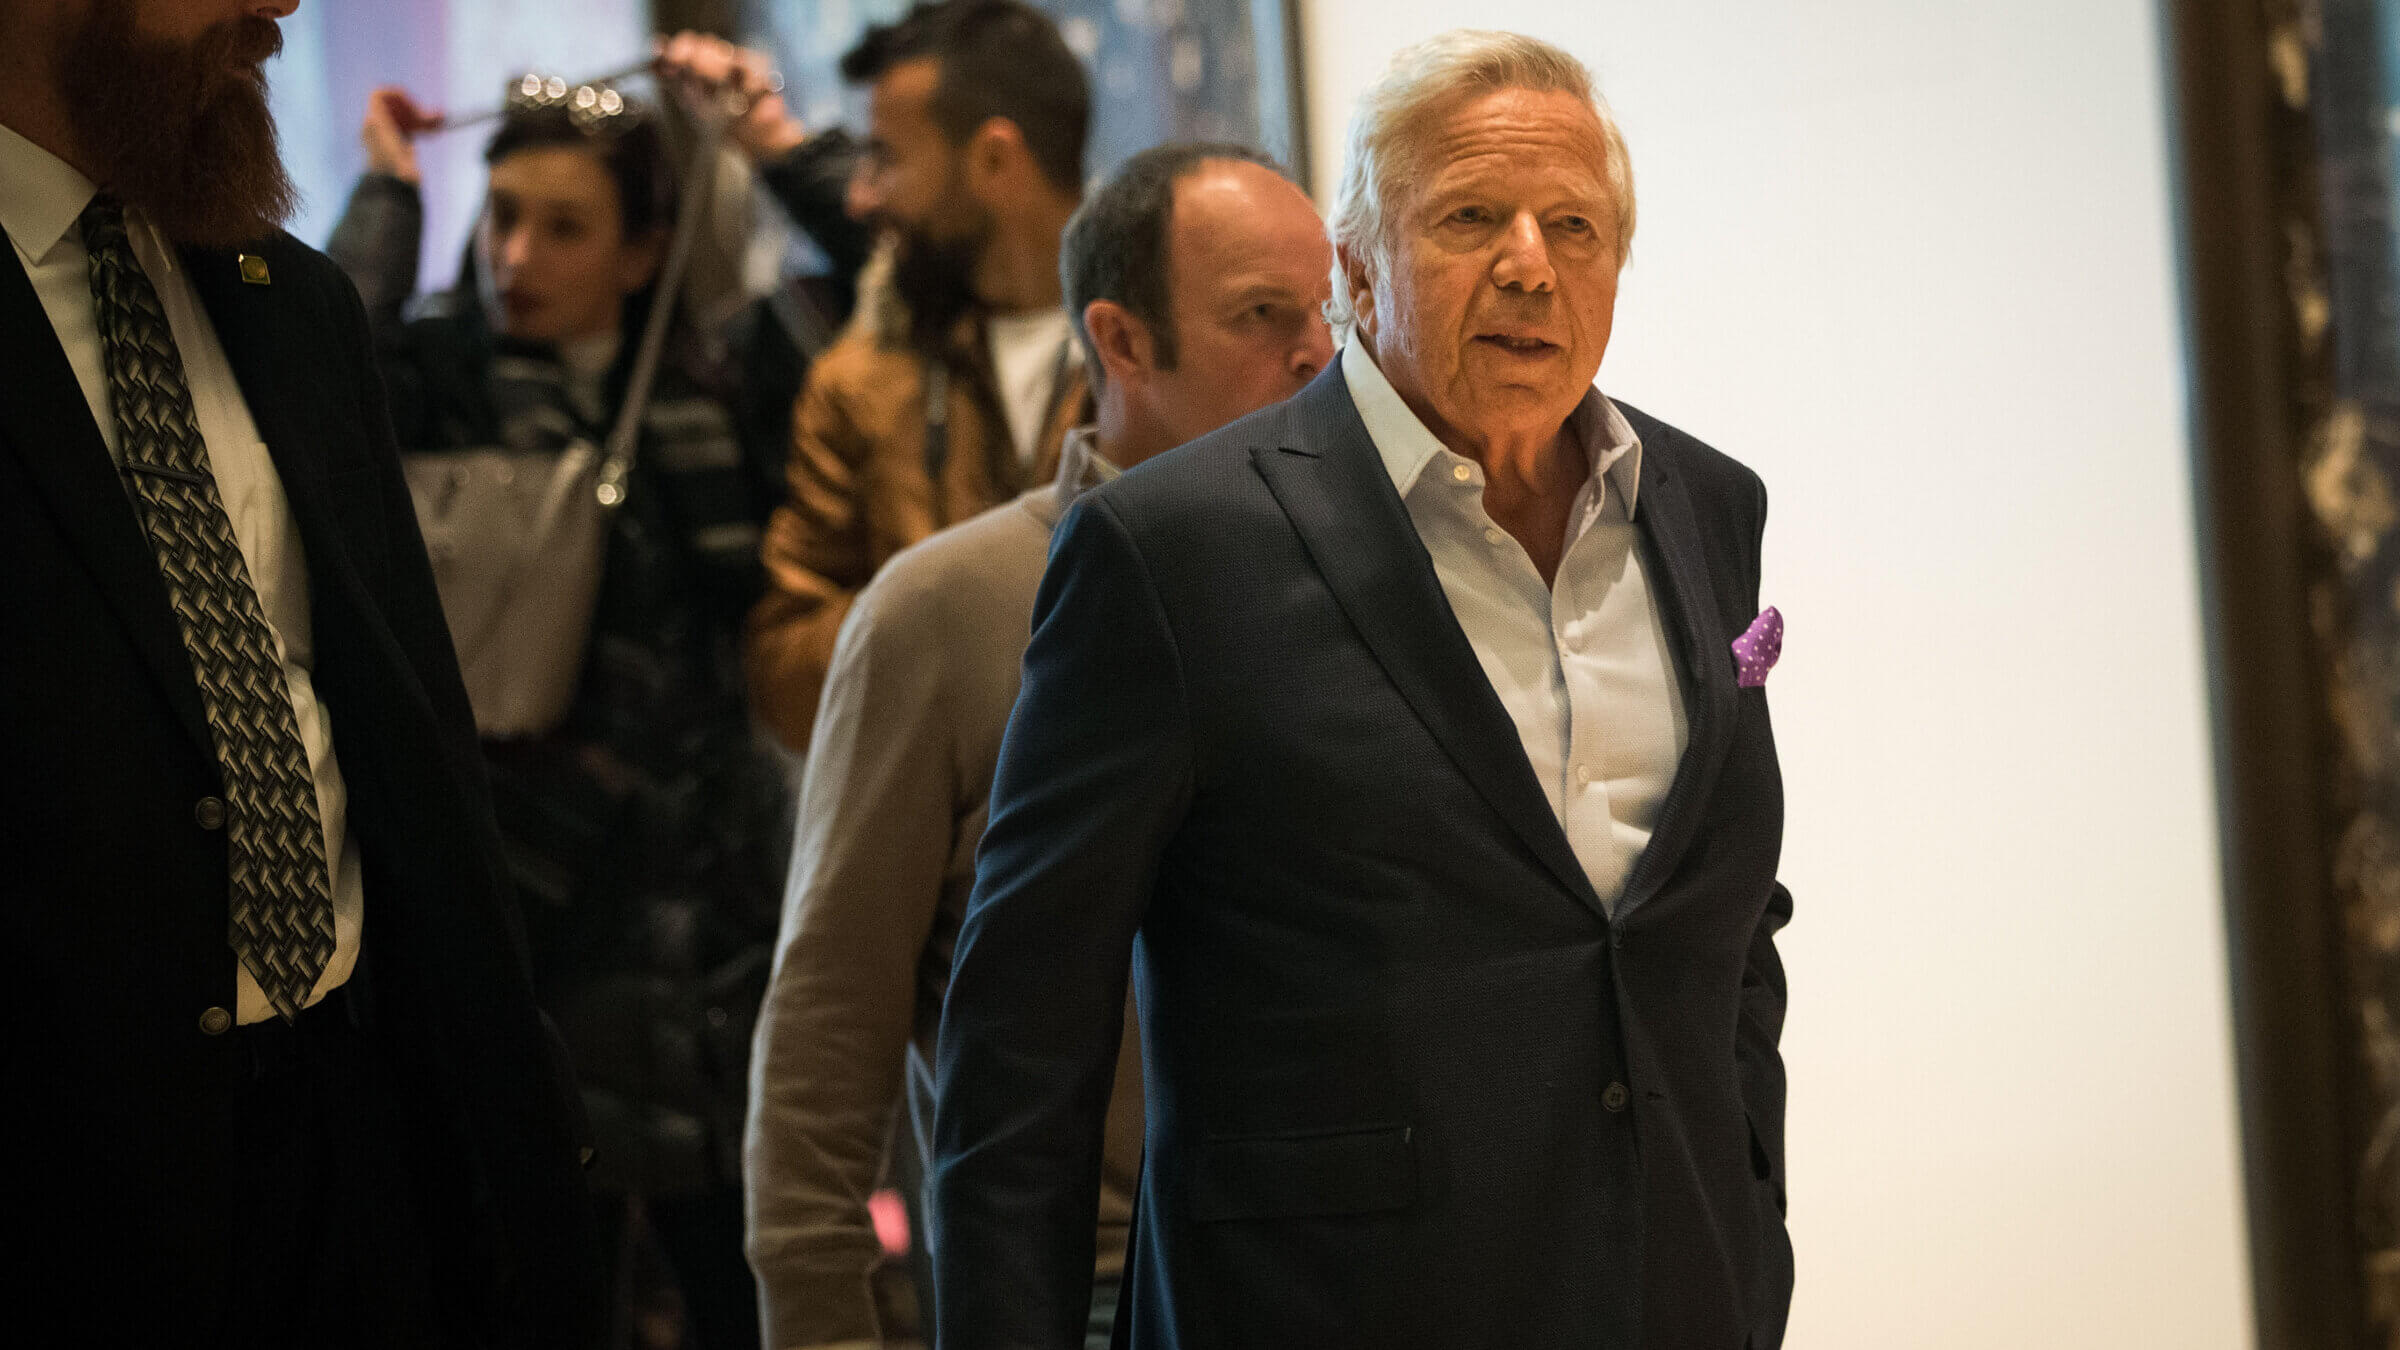 Robert Kraft, the Jewish billionaire and owner of the New England Patriots, plans to spend at least $25 million to run advertisements raising awareness about antisemitism.